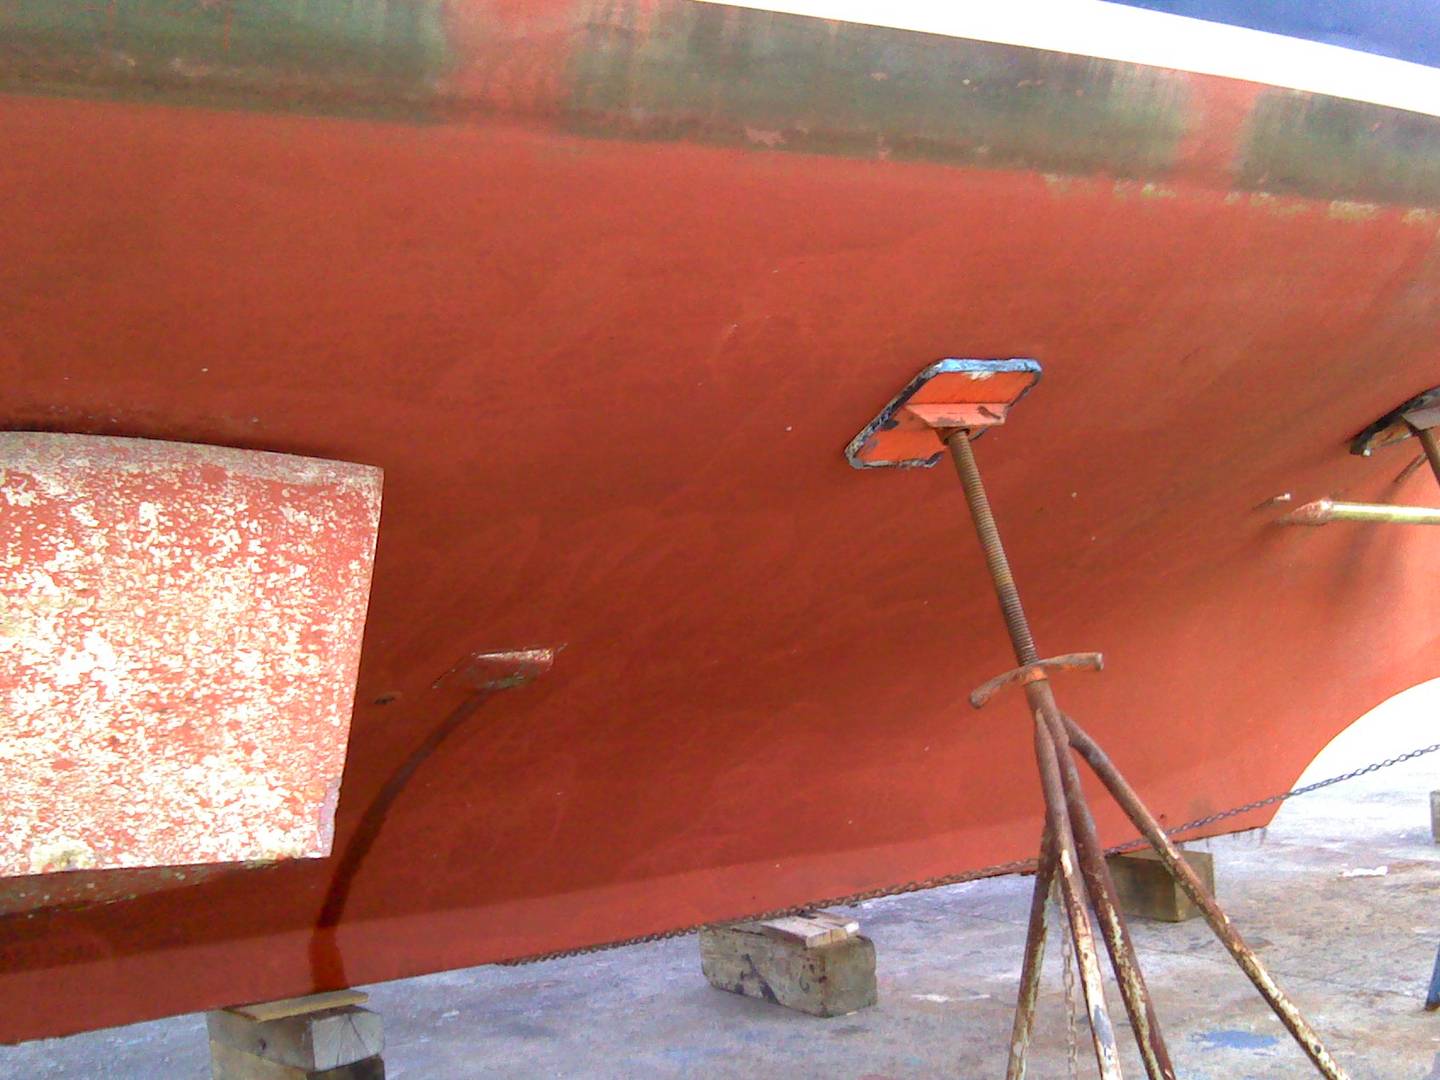 Offshore Marine Inspections